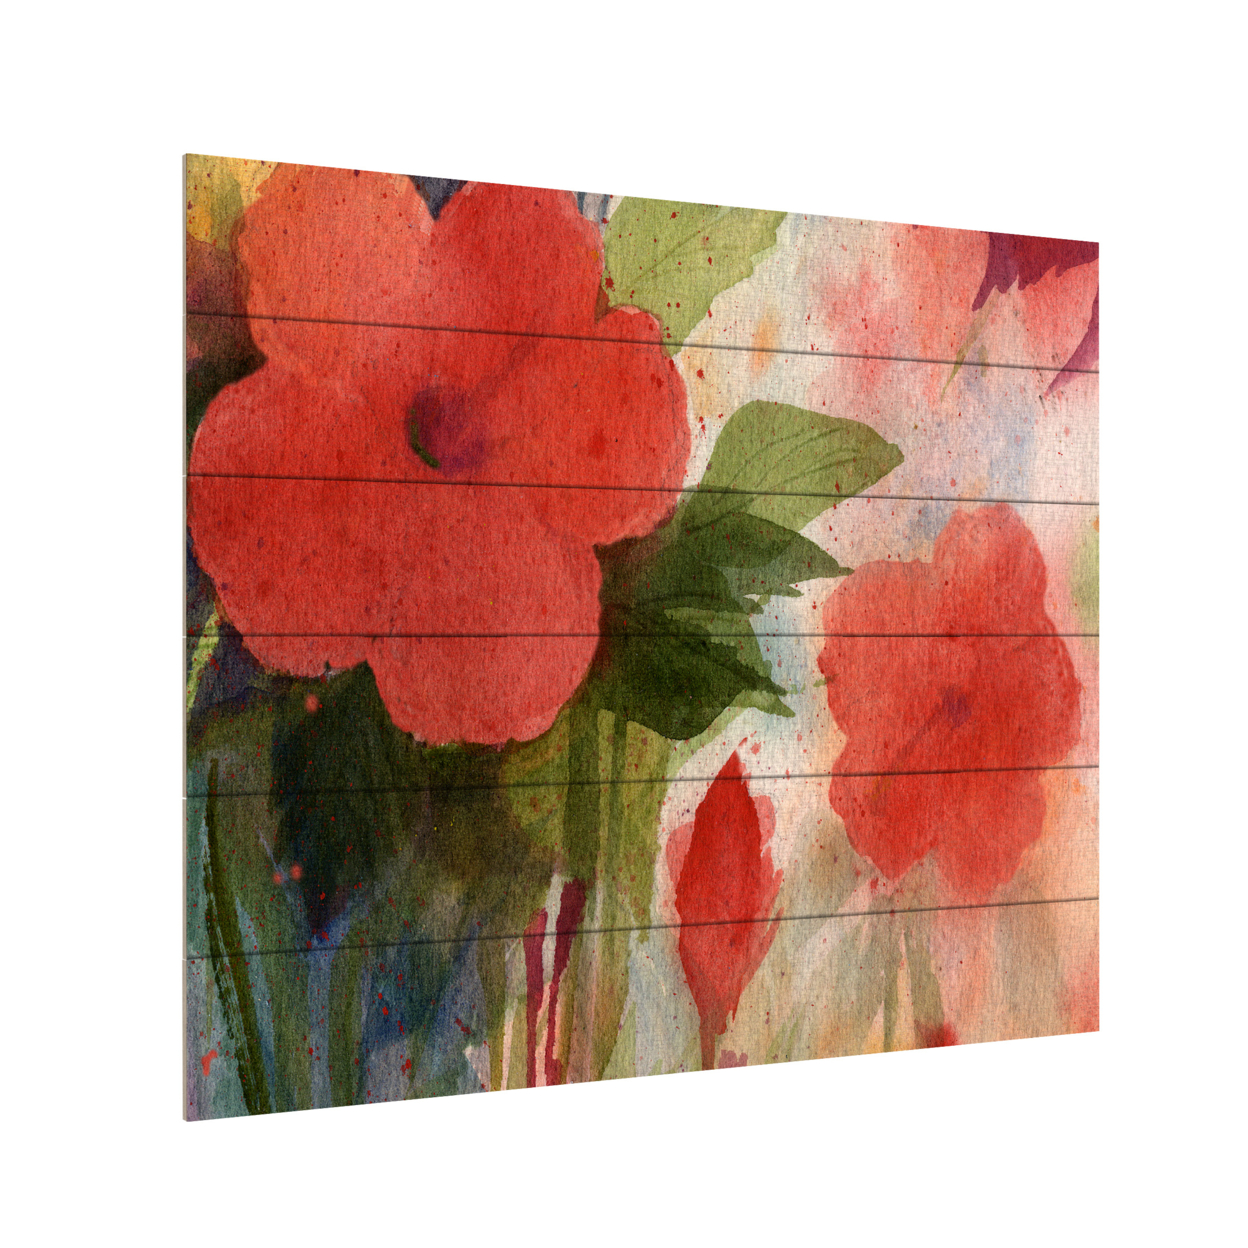 Wooden Slat Art 18 X 22 Inches Titled Red Blossoms Ready To Hang Home Decor Picture